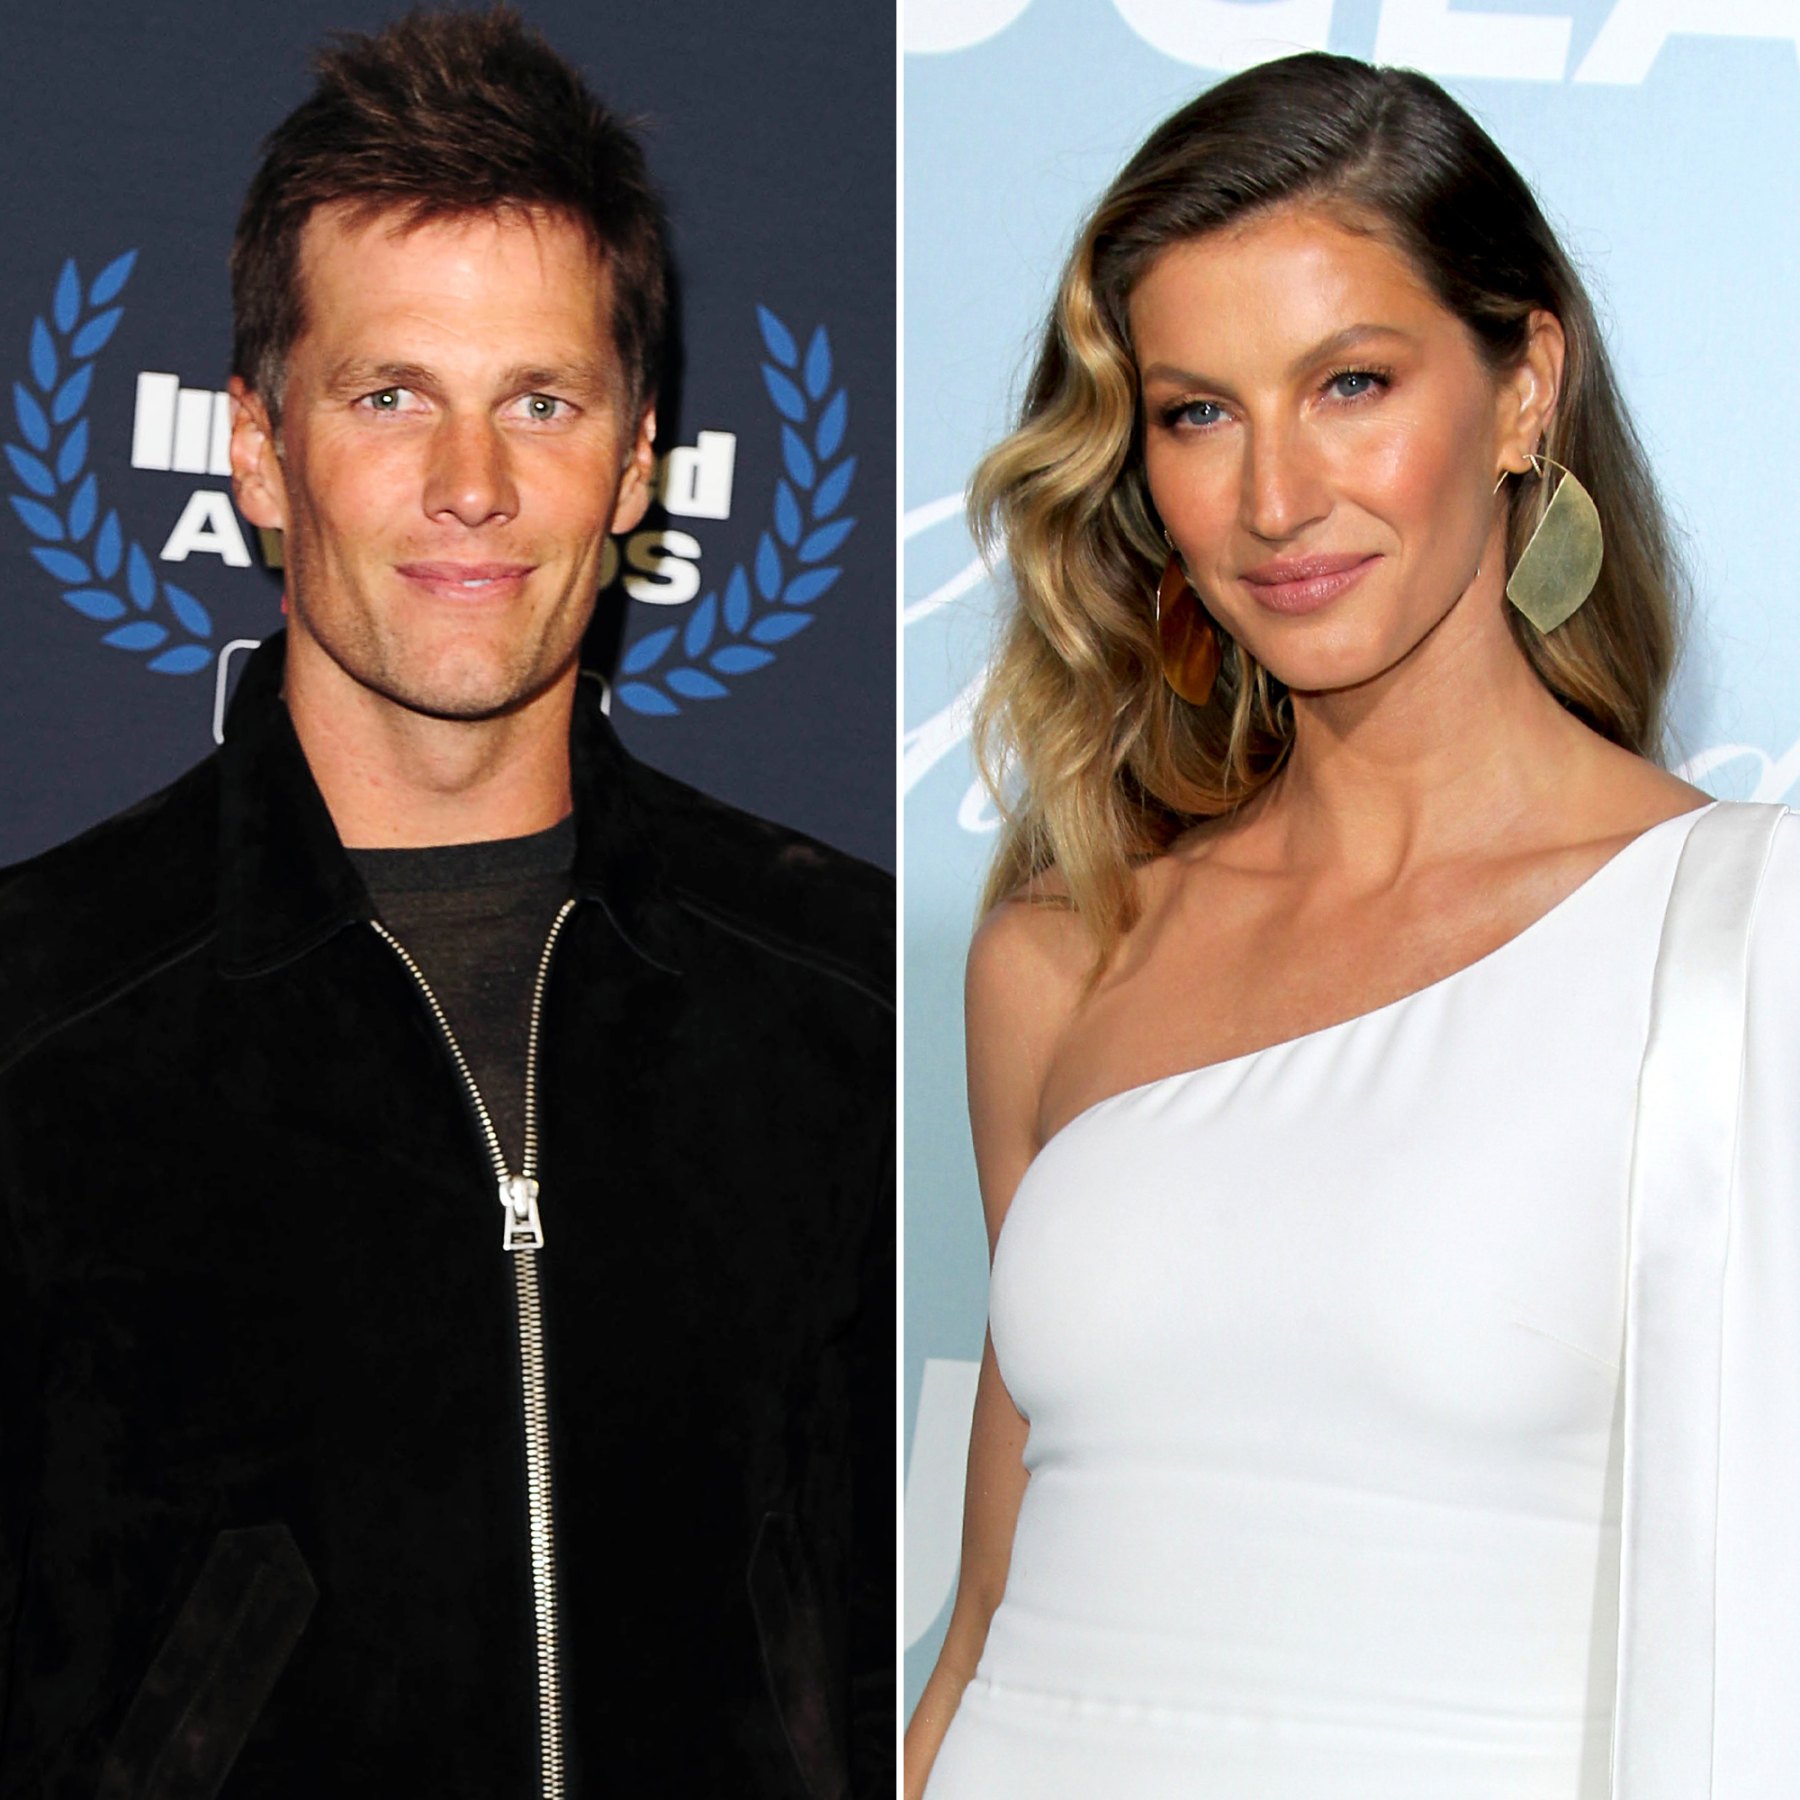 Tom Brady Shares Cryptic Quote After Gisele Bundchens Split Comments Us Weekly 7663